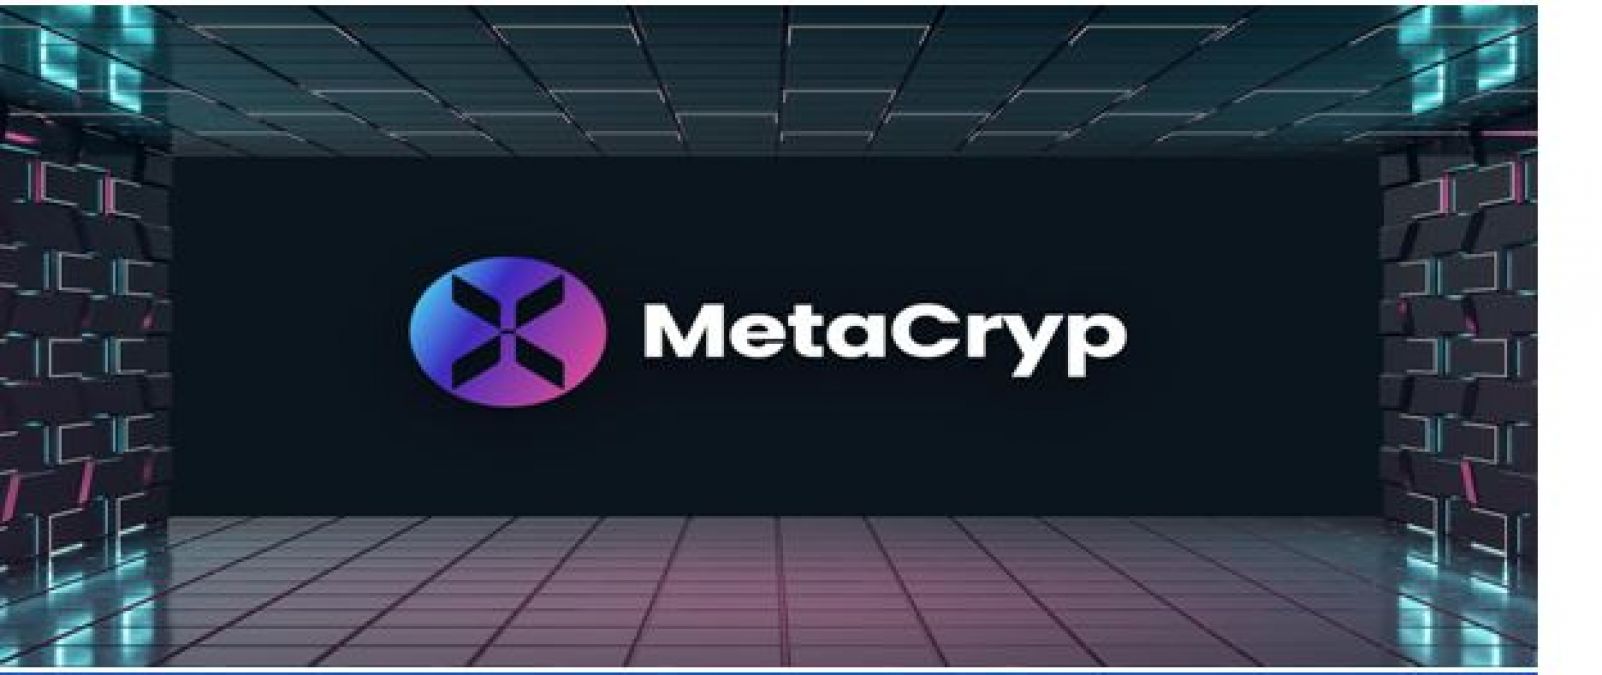 Metacryp Network is Connecting Global  Users in the Metaverse and Gaming World by Providing Decentralised Features